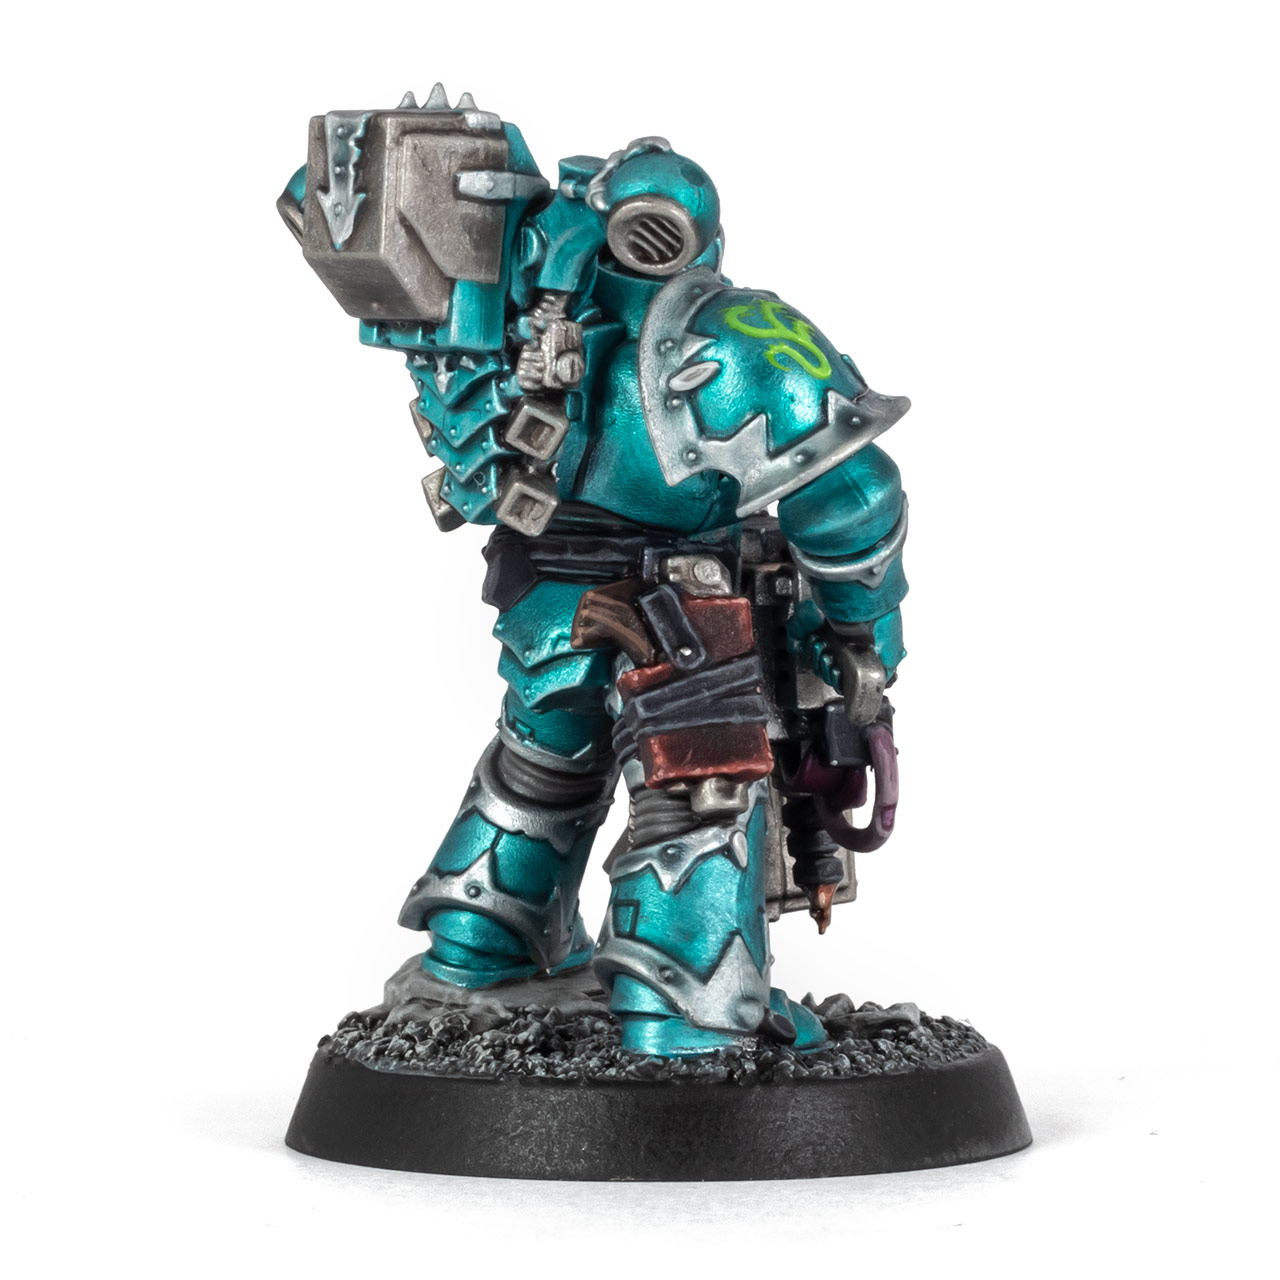 Alpha Legion Chaos Space Marine Legionary Heavy Gunner with Heavy Bolter painted by Stahly, back